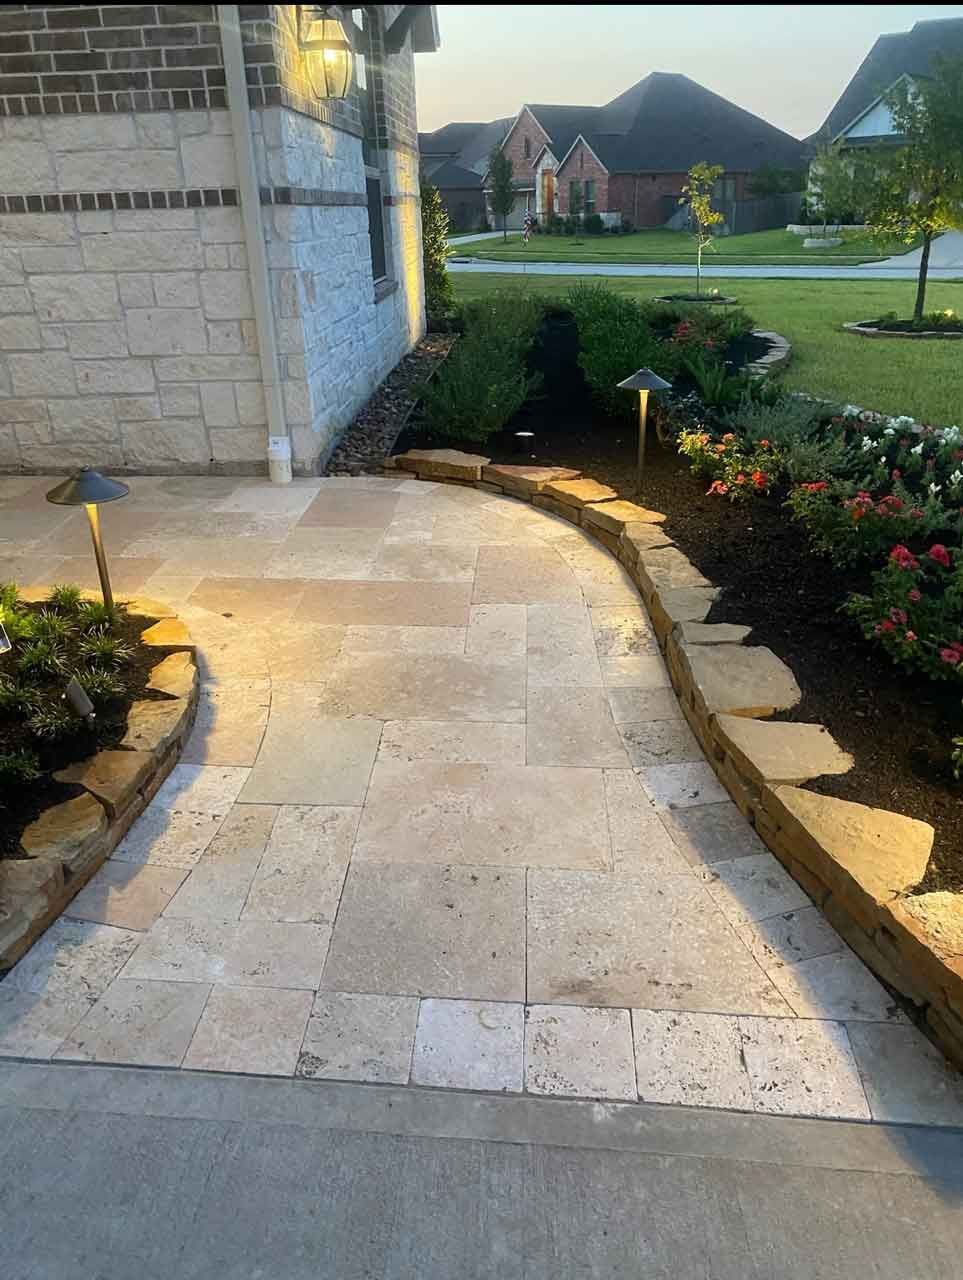 Walking path in limestone with landscaping with flowers and plants